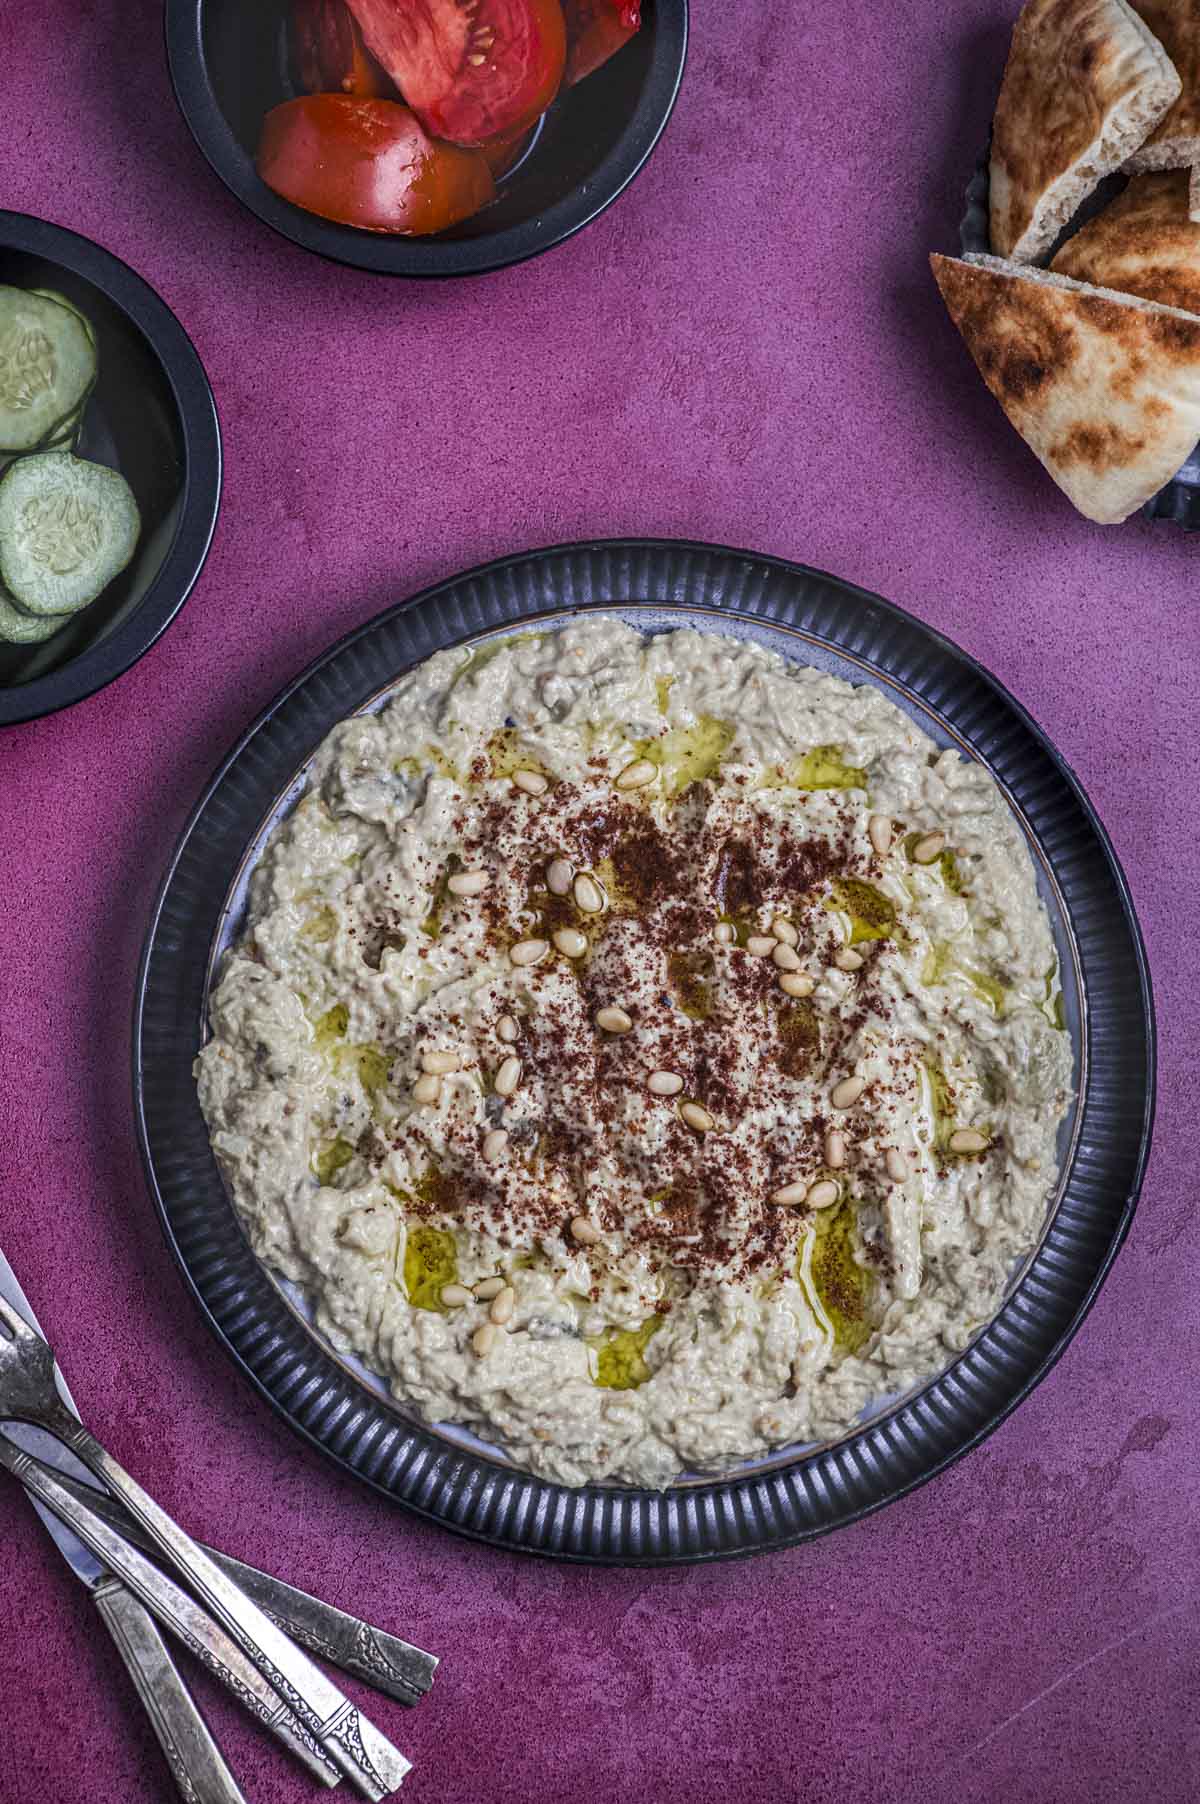 A plate of baba ganoush on a magenta surface
